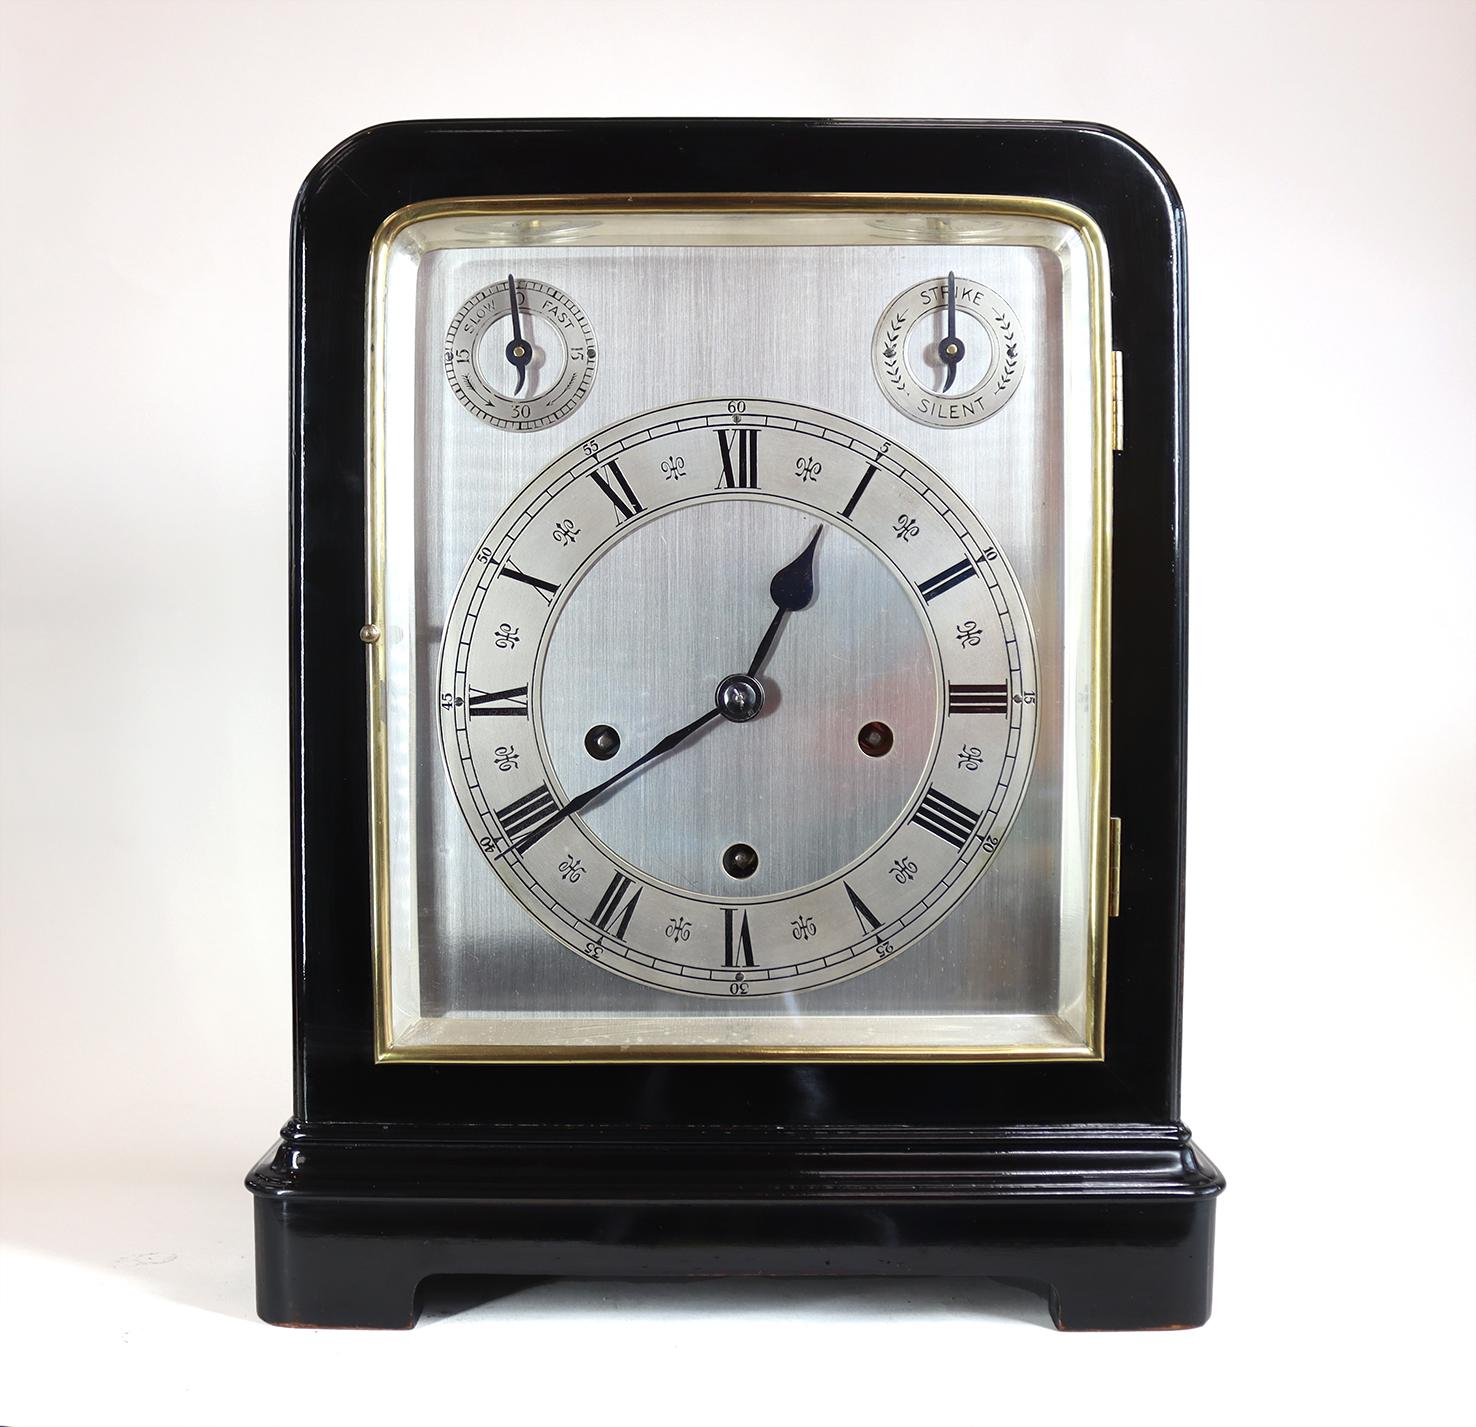 A very stylish late 19th century bracket clock in an ebonised case with heavy bevelled glass to all sides and top, with a pristine silvered dial and roman chapter ring below strike silent and time keeping adjustment dials, behind a brass bezel and